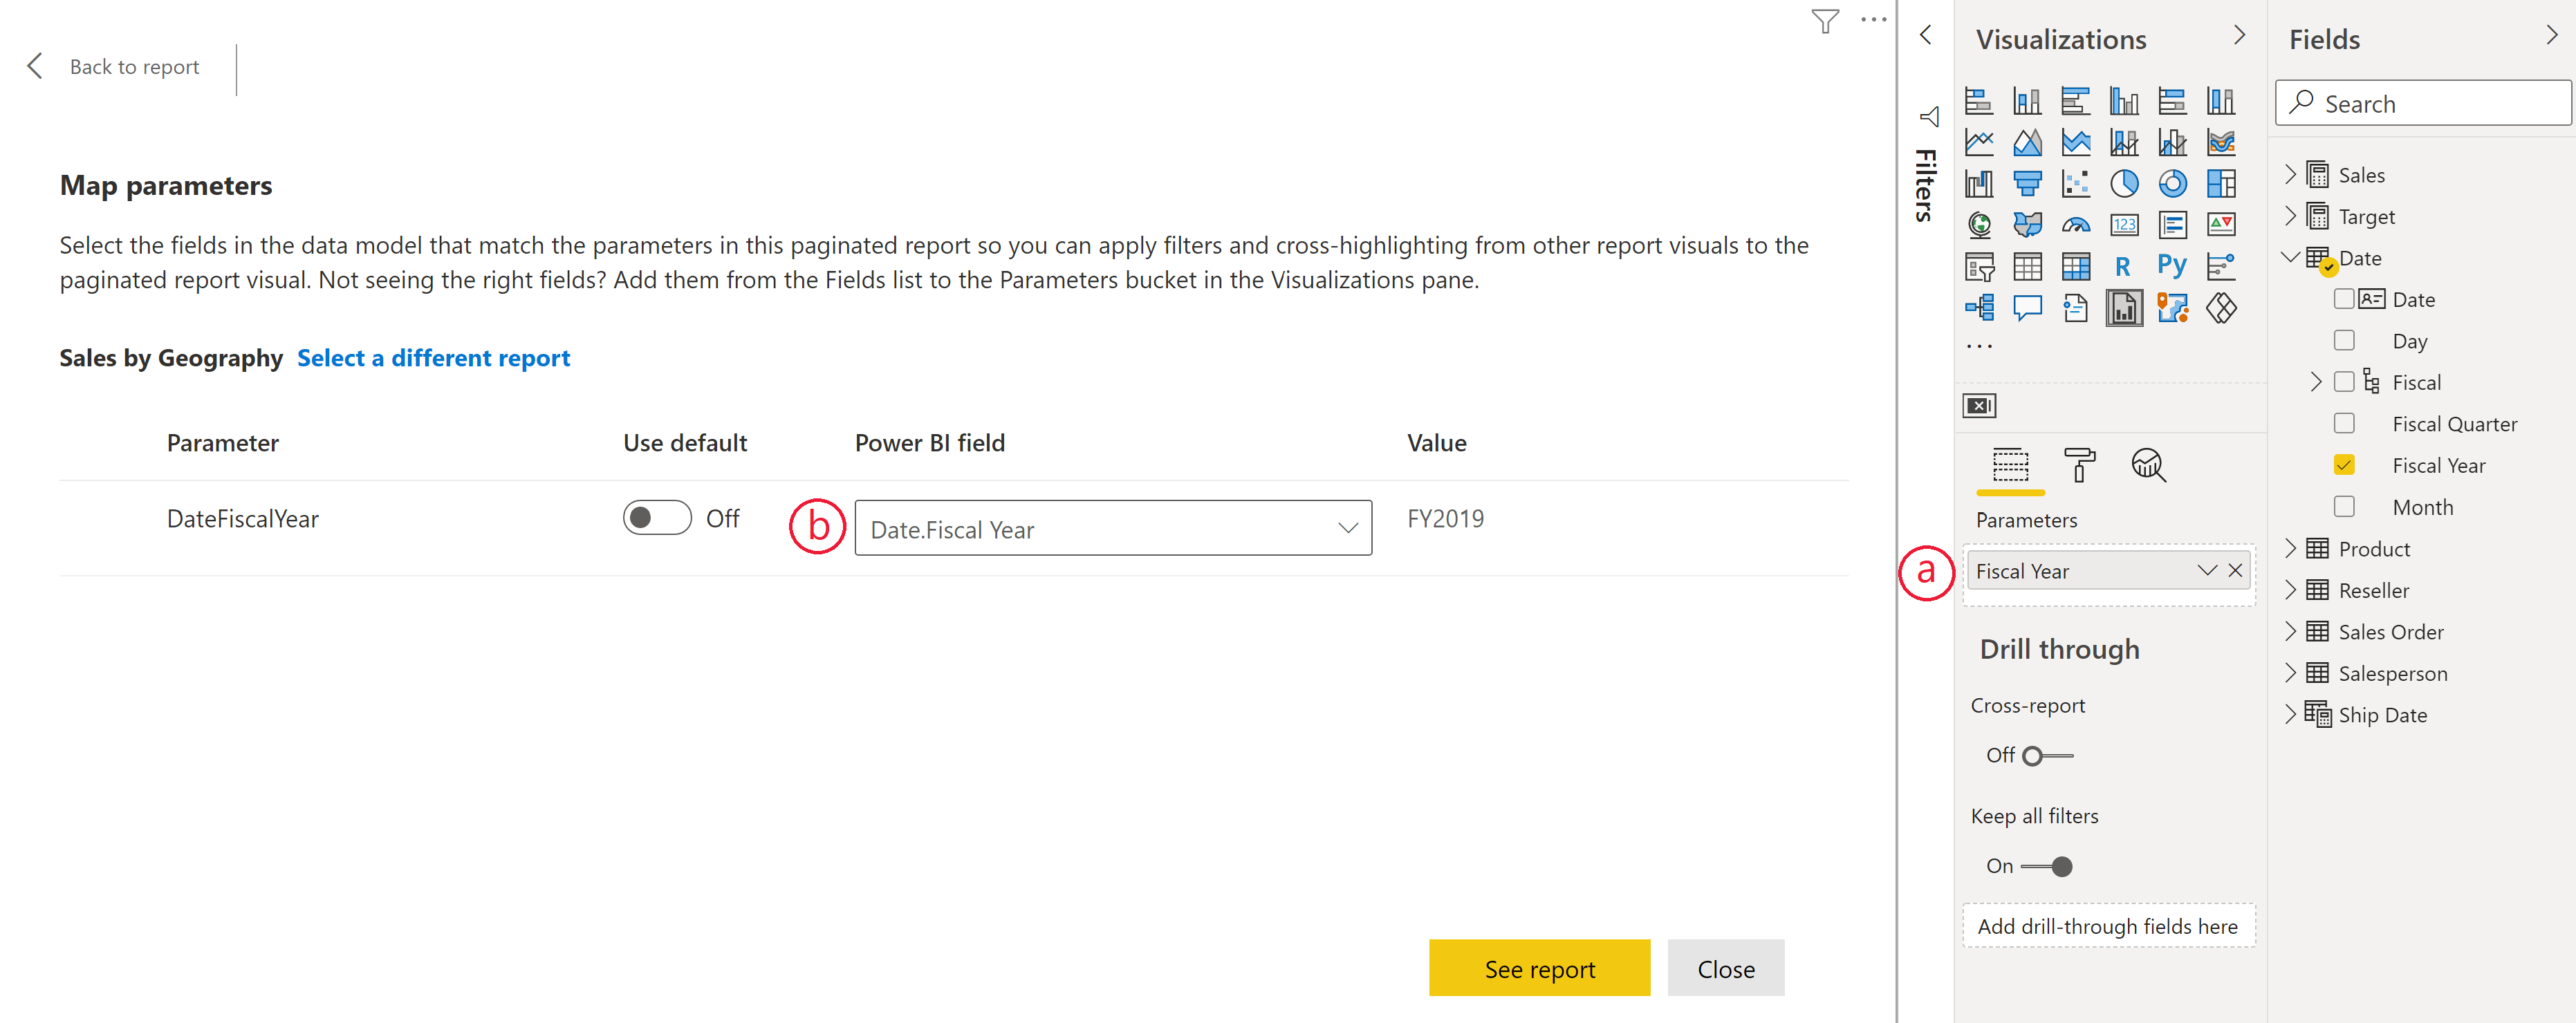 Screenshot of binding a field in Power BI to a parameter in the paginated report visual.